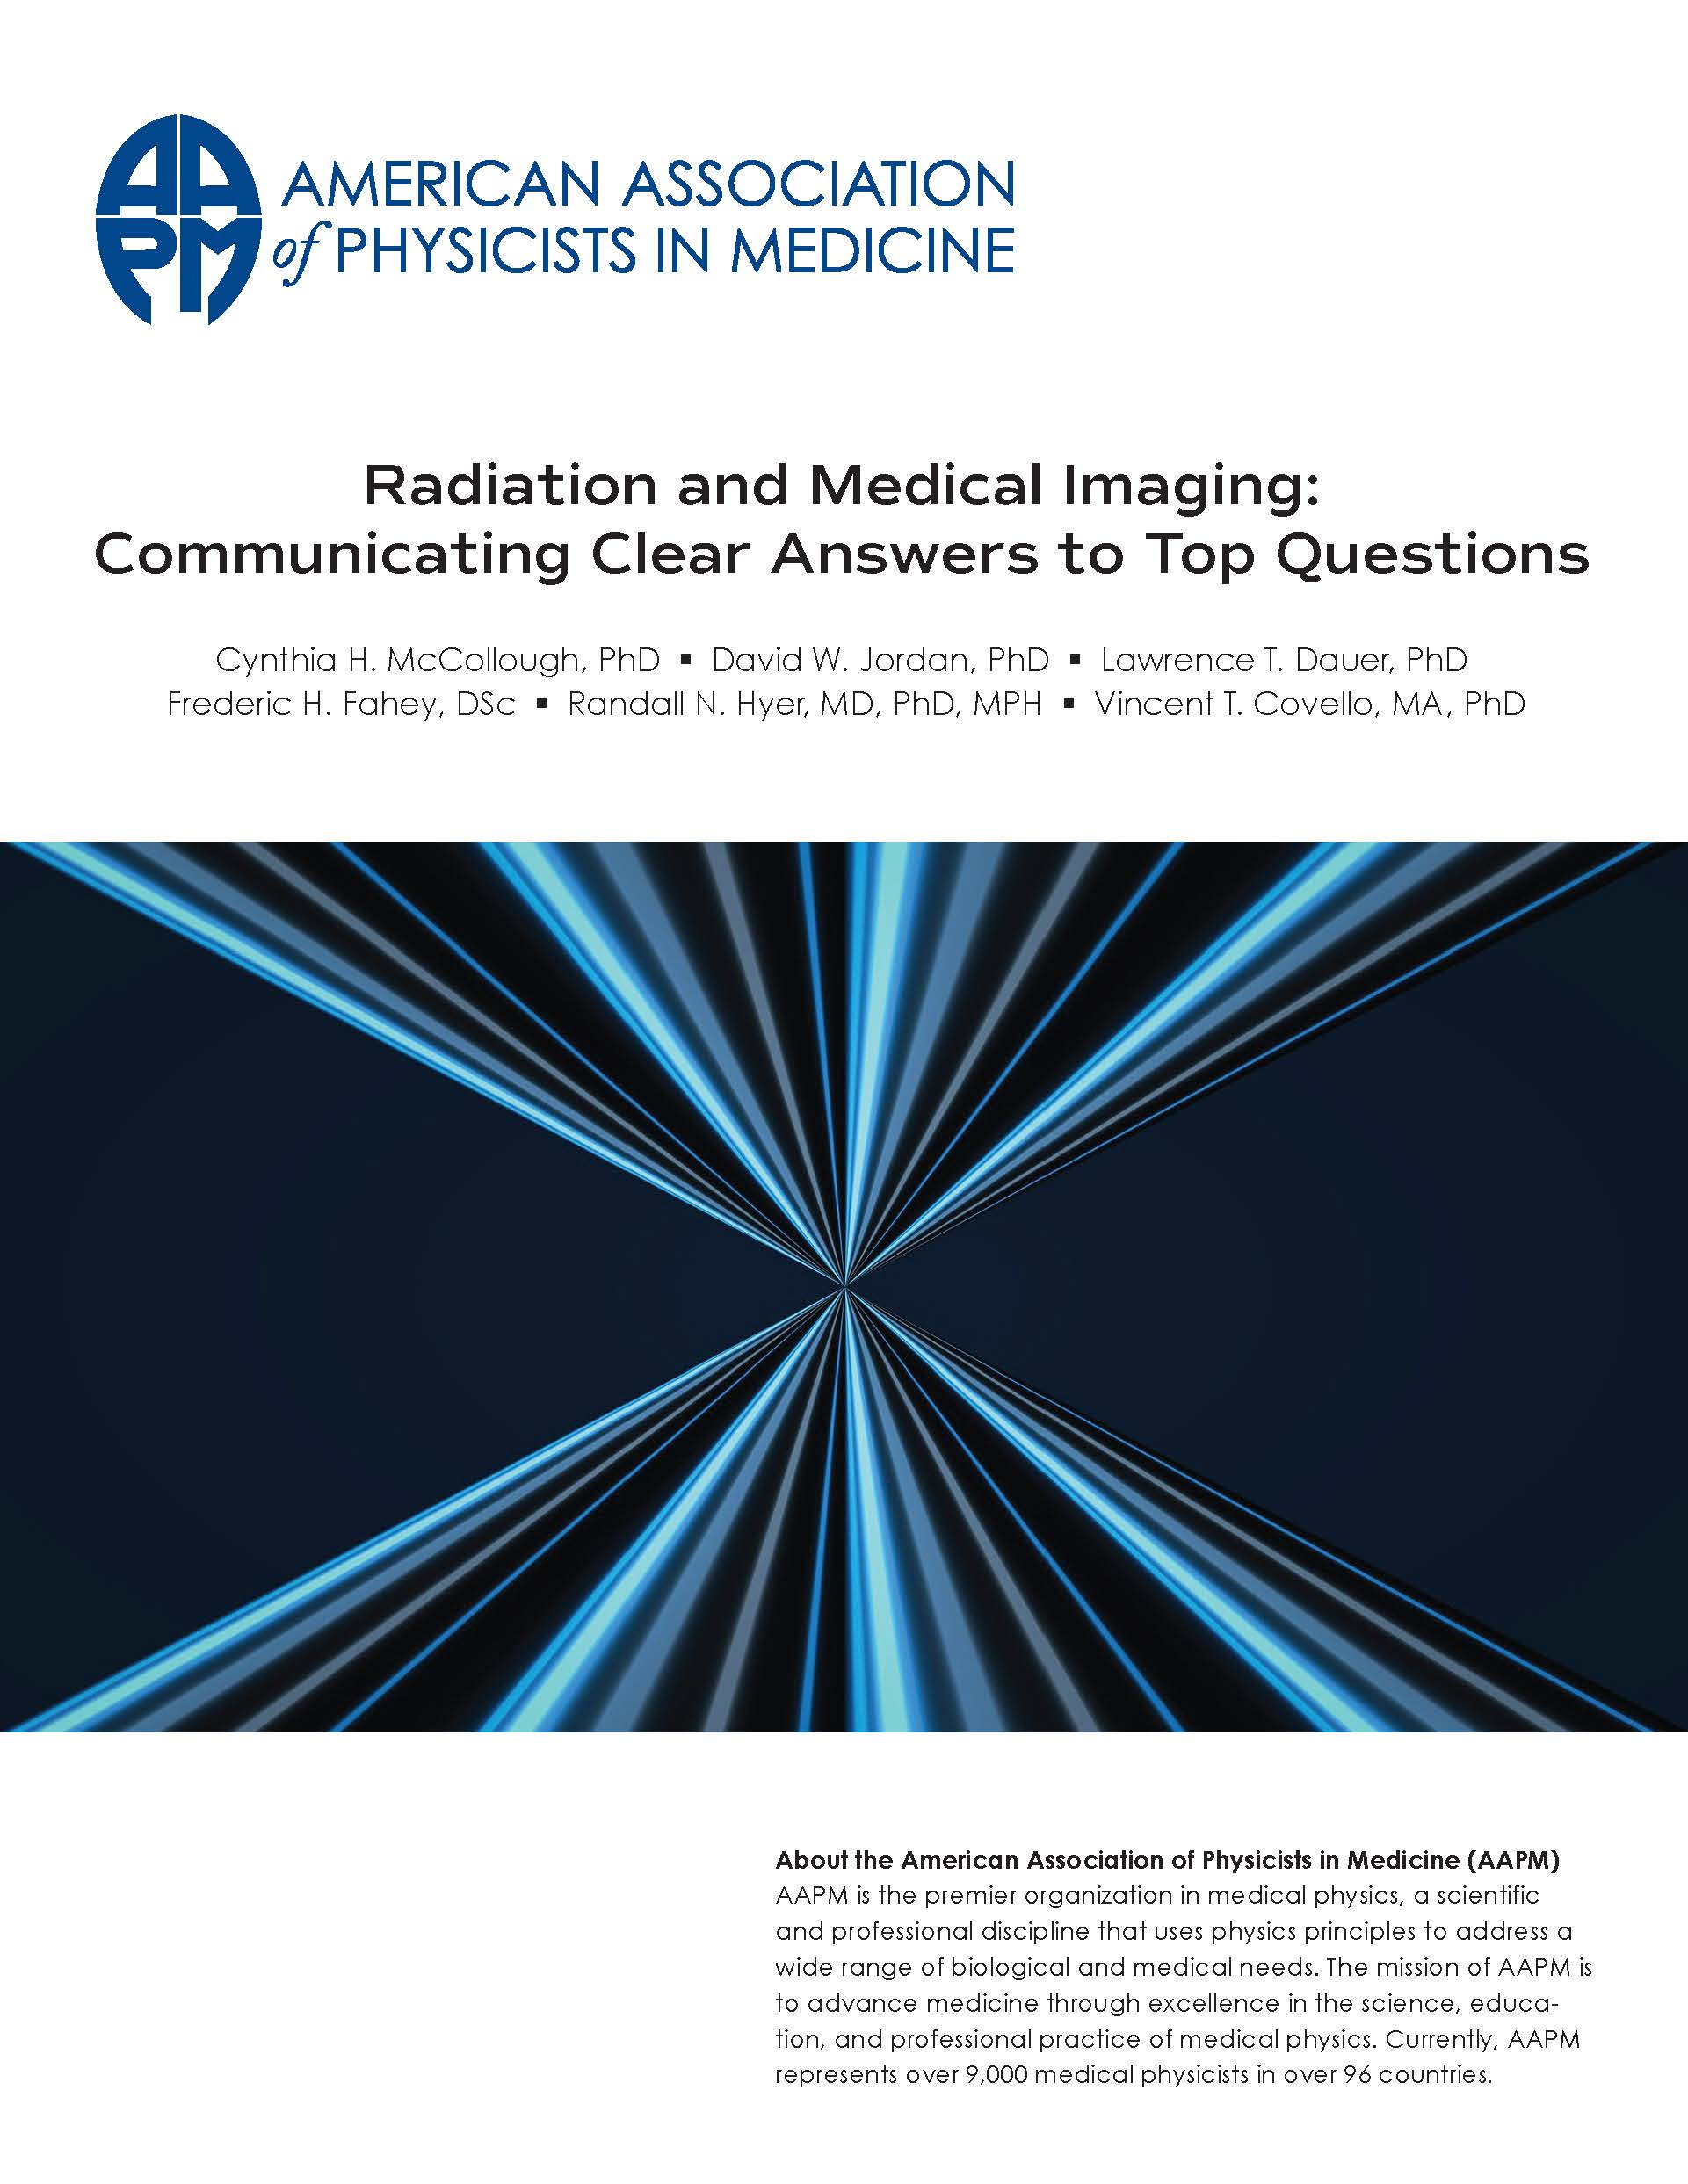 AAPM Radiation and Medical Imaging Communication Guide